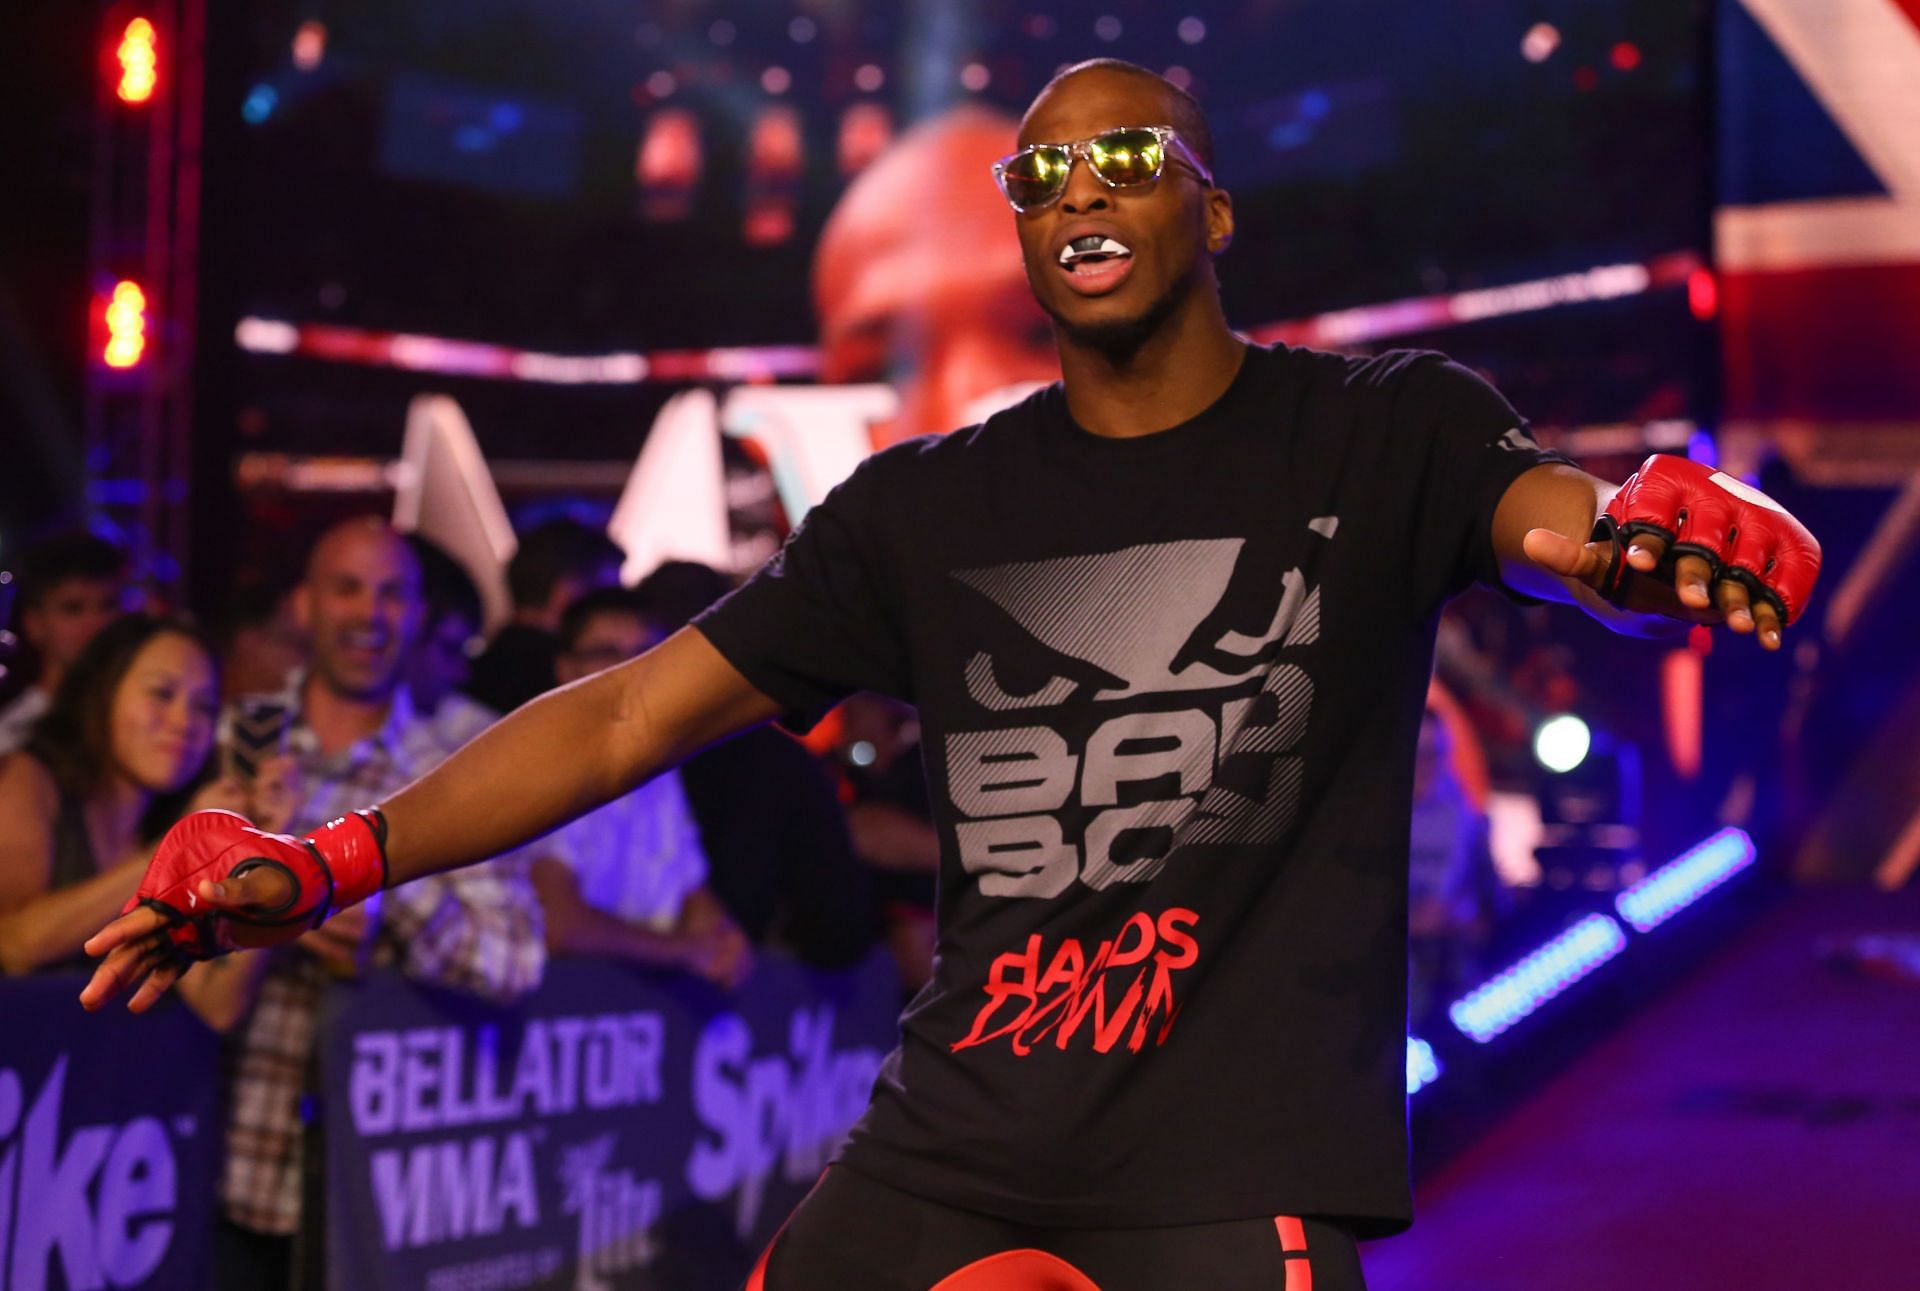 Michael Page might be a viable opponent for Diaz outside of the UFC